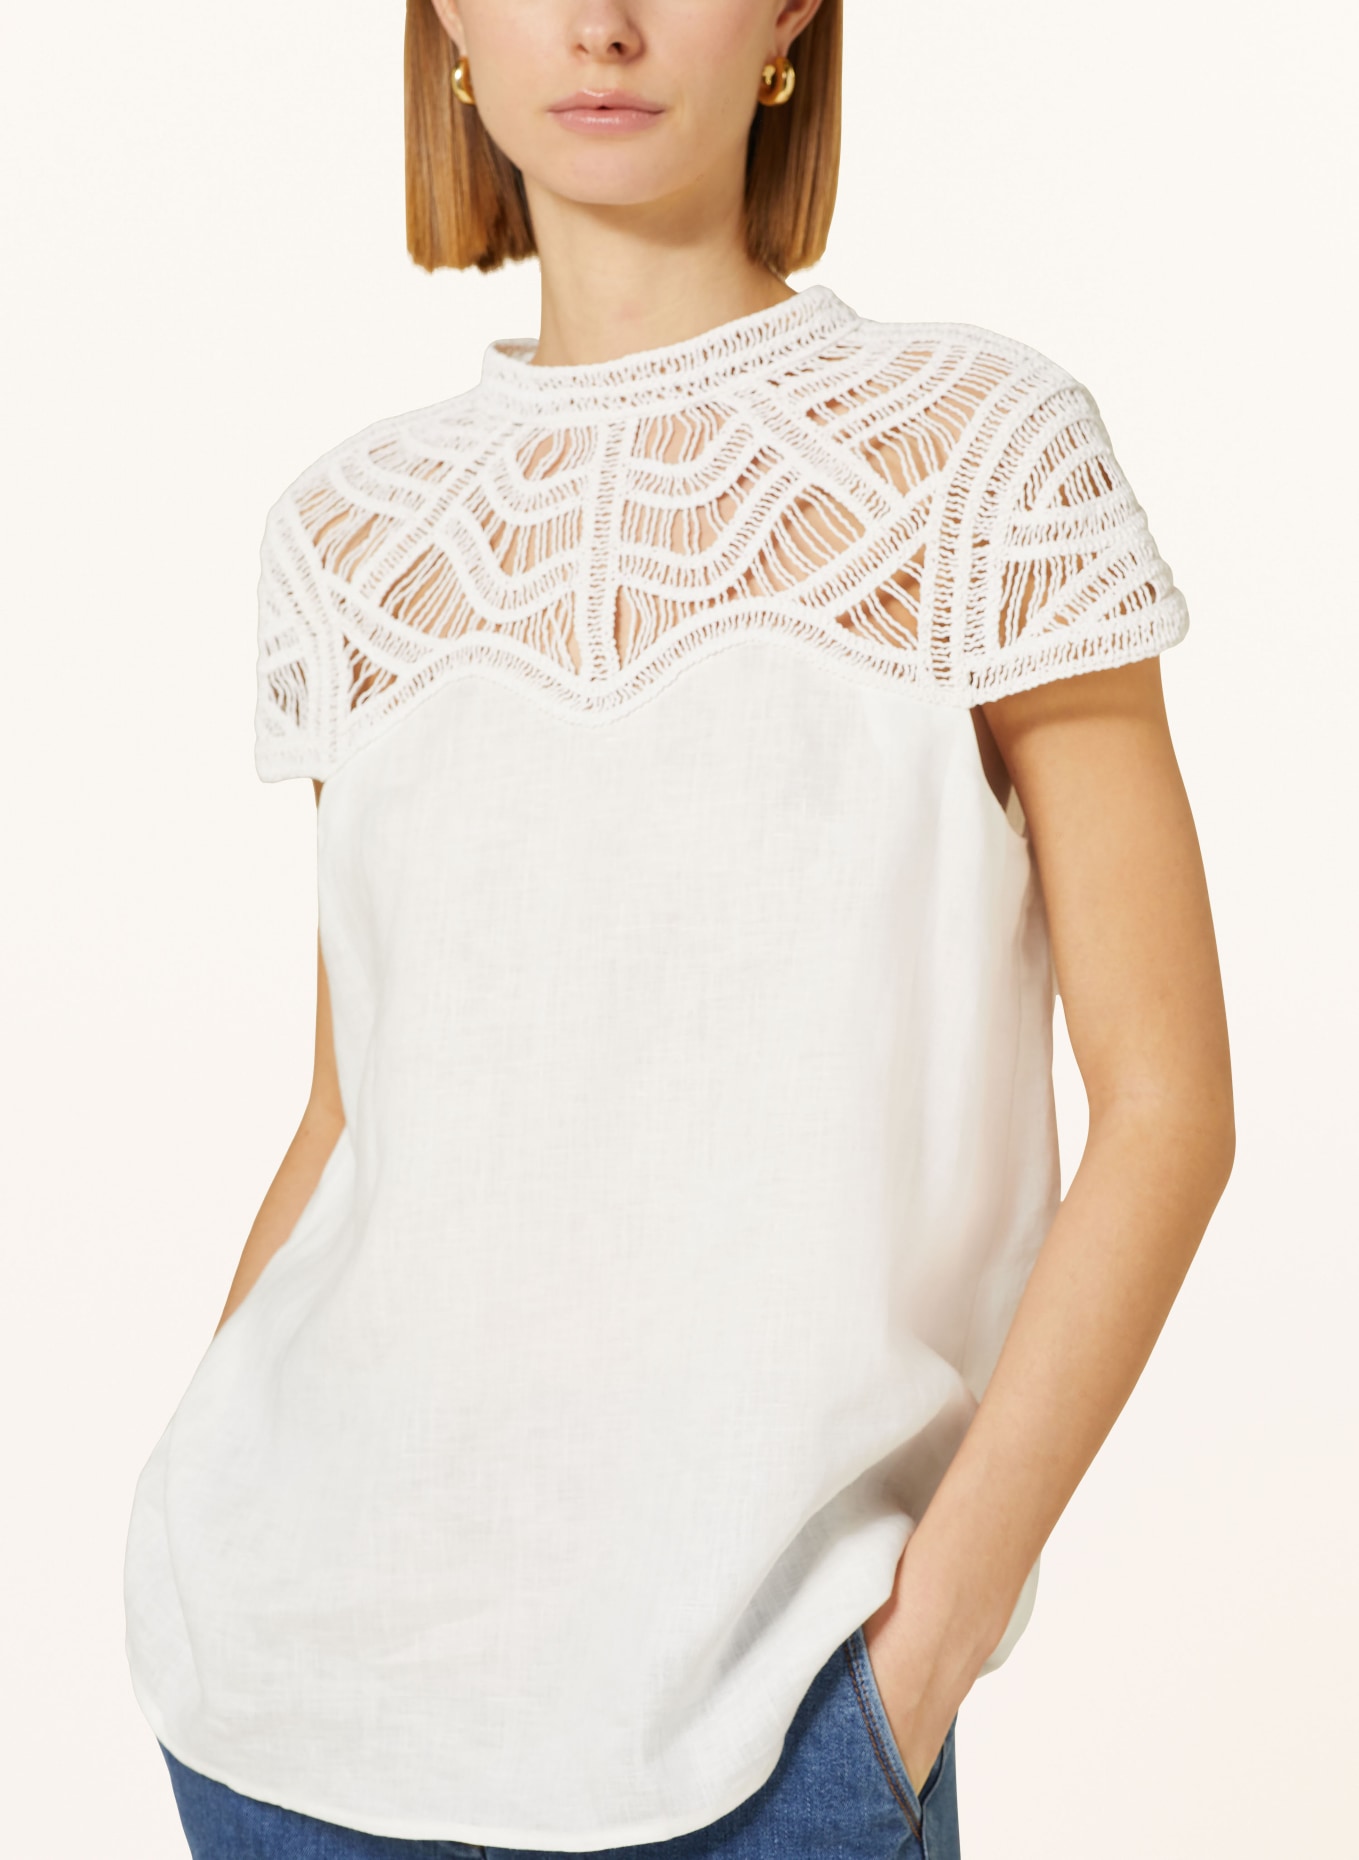 RIANI Shirt blouse made of linen with lace, Color: WHITE (Image 4)